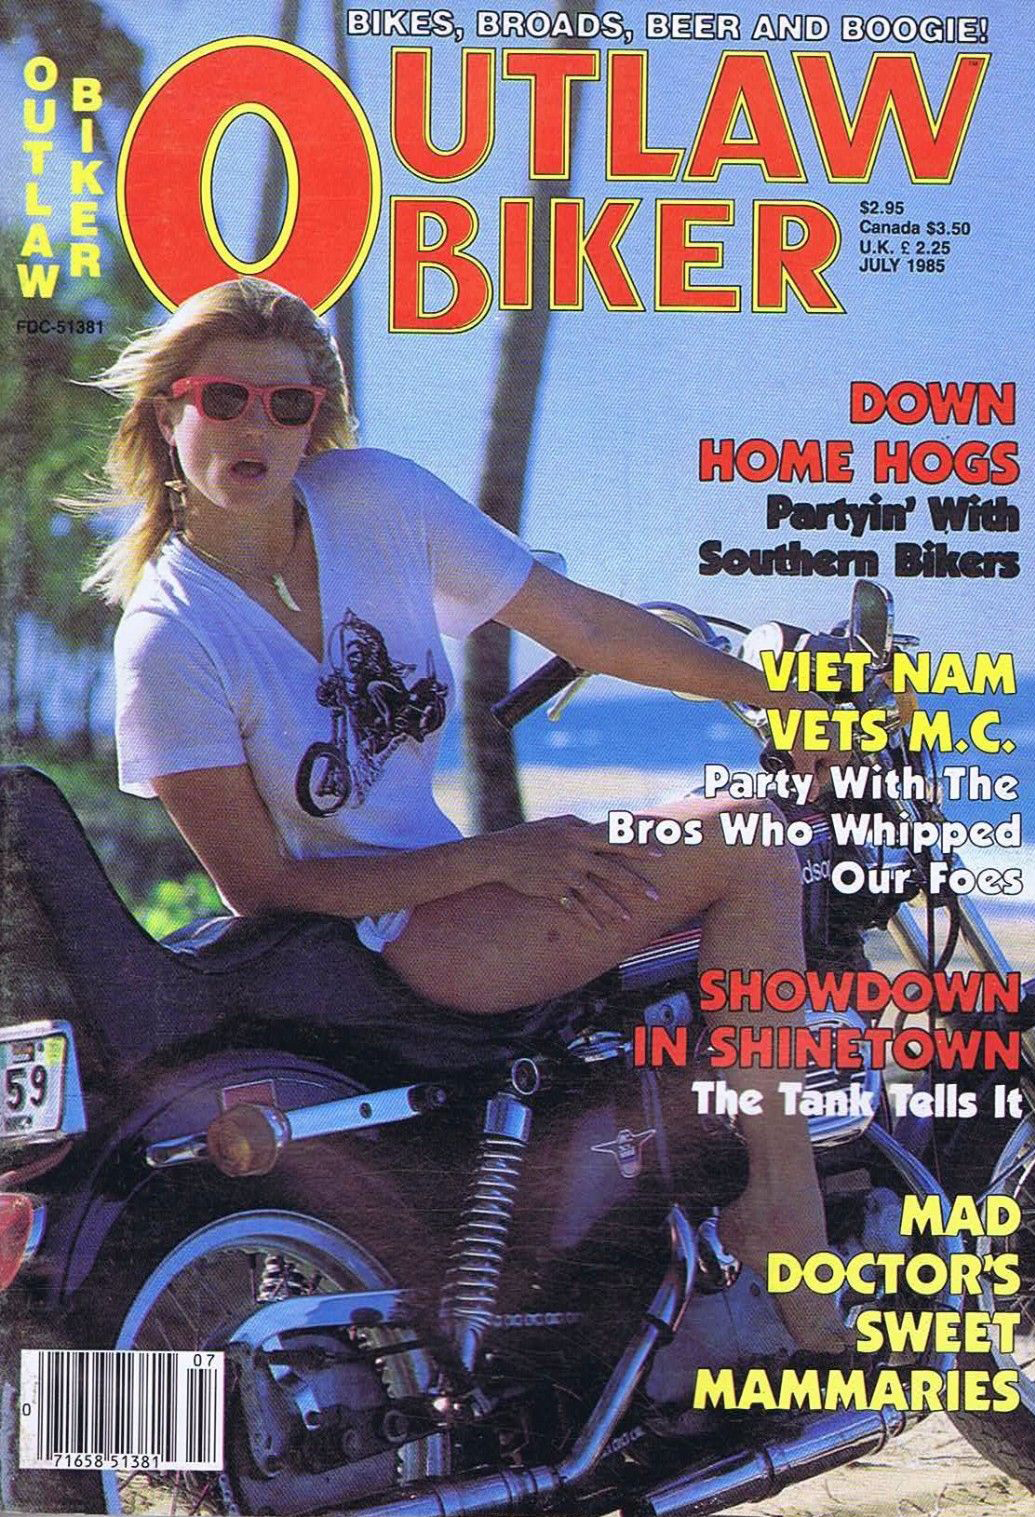 Outlaw Biker July 1985 magazine back issue Outlaw Biker magizine back copy Outlaw Biker July 1985 Magazine Back Issue for Bike Riding Rebels and Members of Outlaw Motorcycle Clubs. Down Home Hogs Partyin With Southern Bikers.